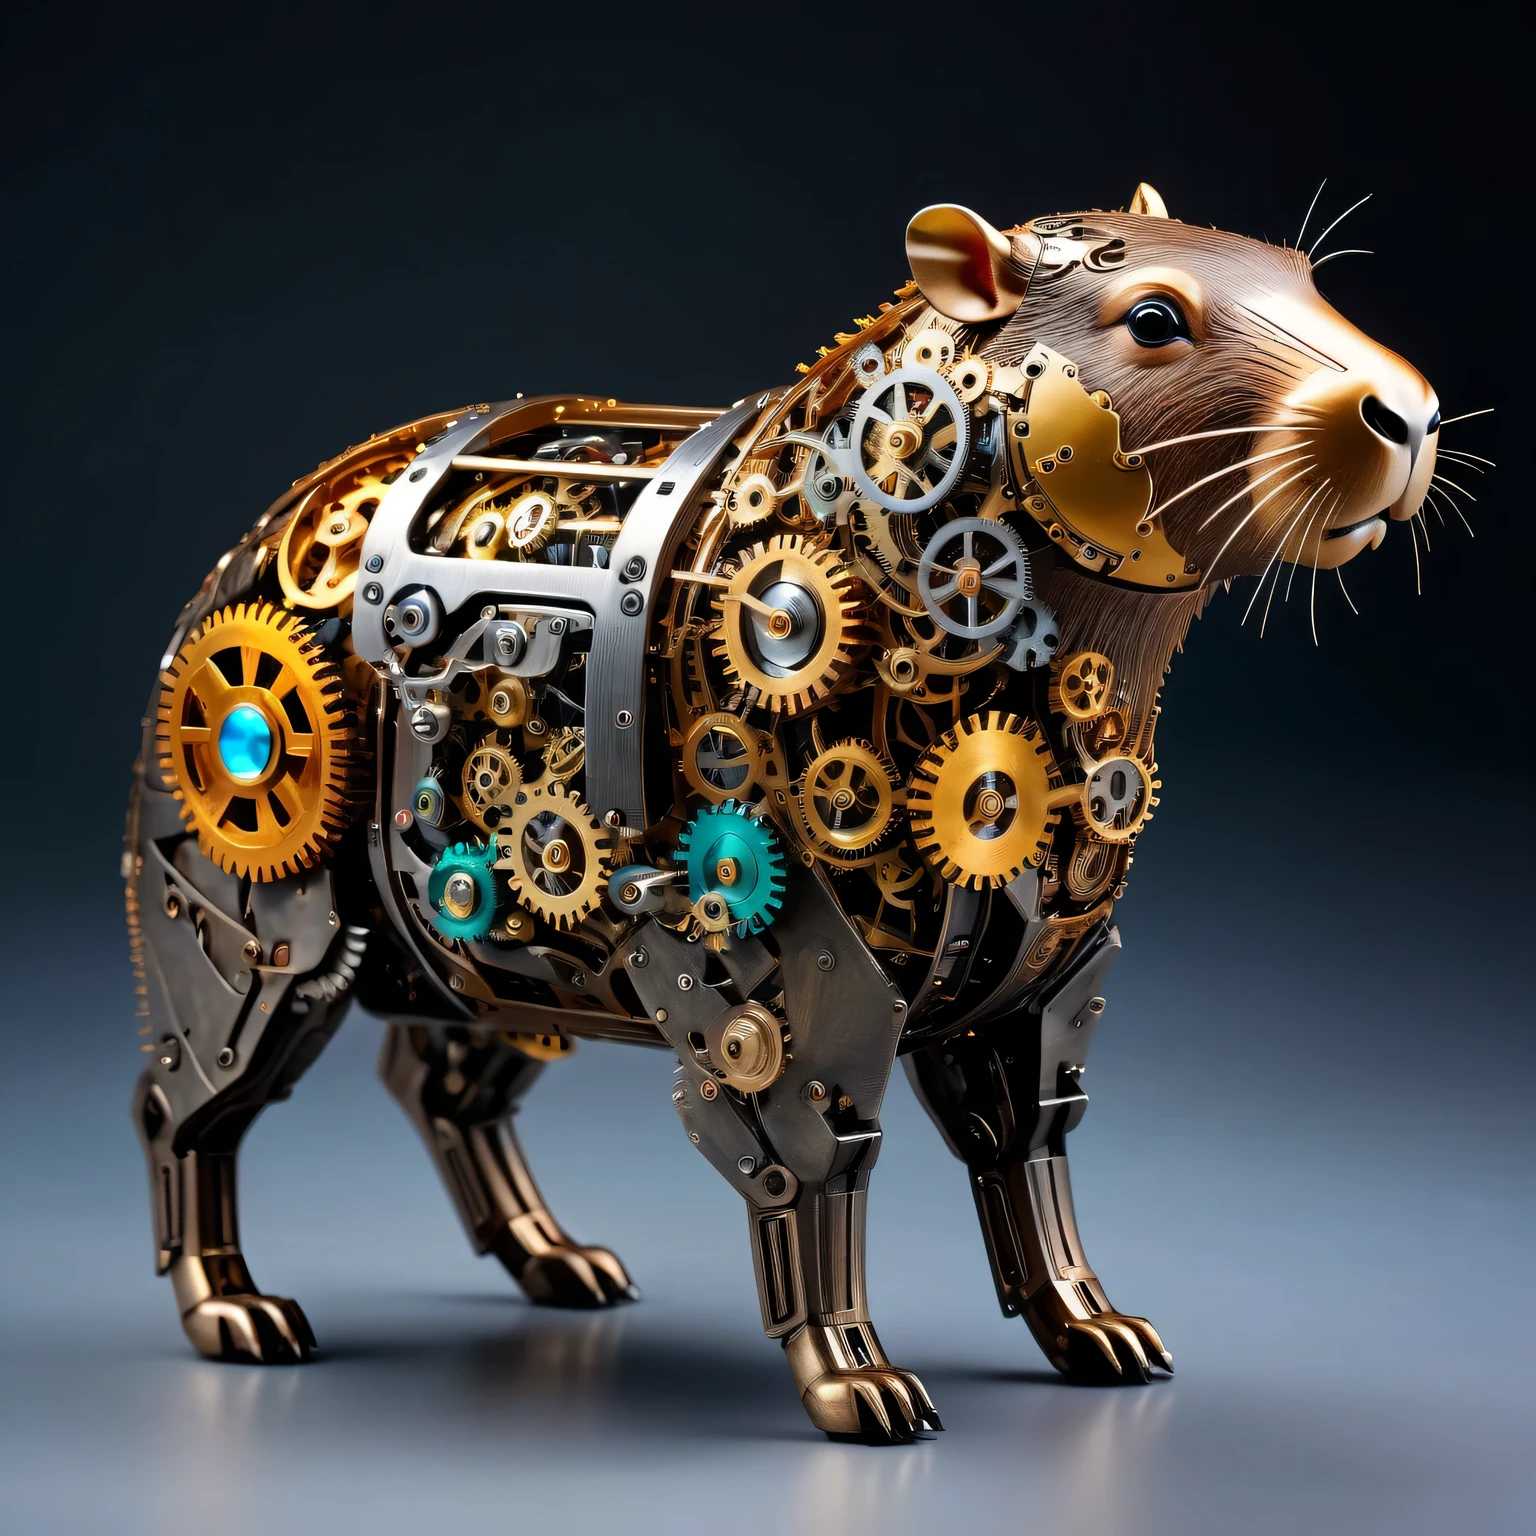 best quality,ultra-detailed,realistic,mechanical,robotic,Capybara sculpture,detailed gears and cogs,stainless steel,moving parts,industrial aesthetic,machinery,steampunk,shiny metallic surface,sharp edges and angles,bright studio lighting,colorful LED lights,mechanical movements,clockwork precision